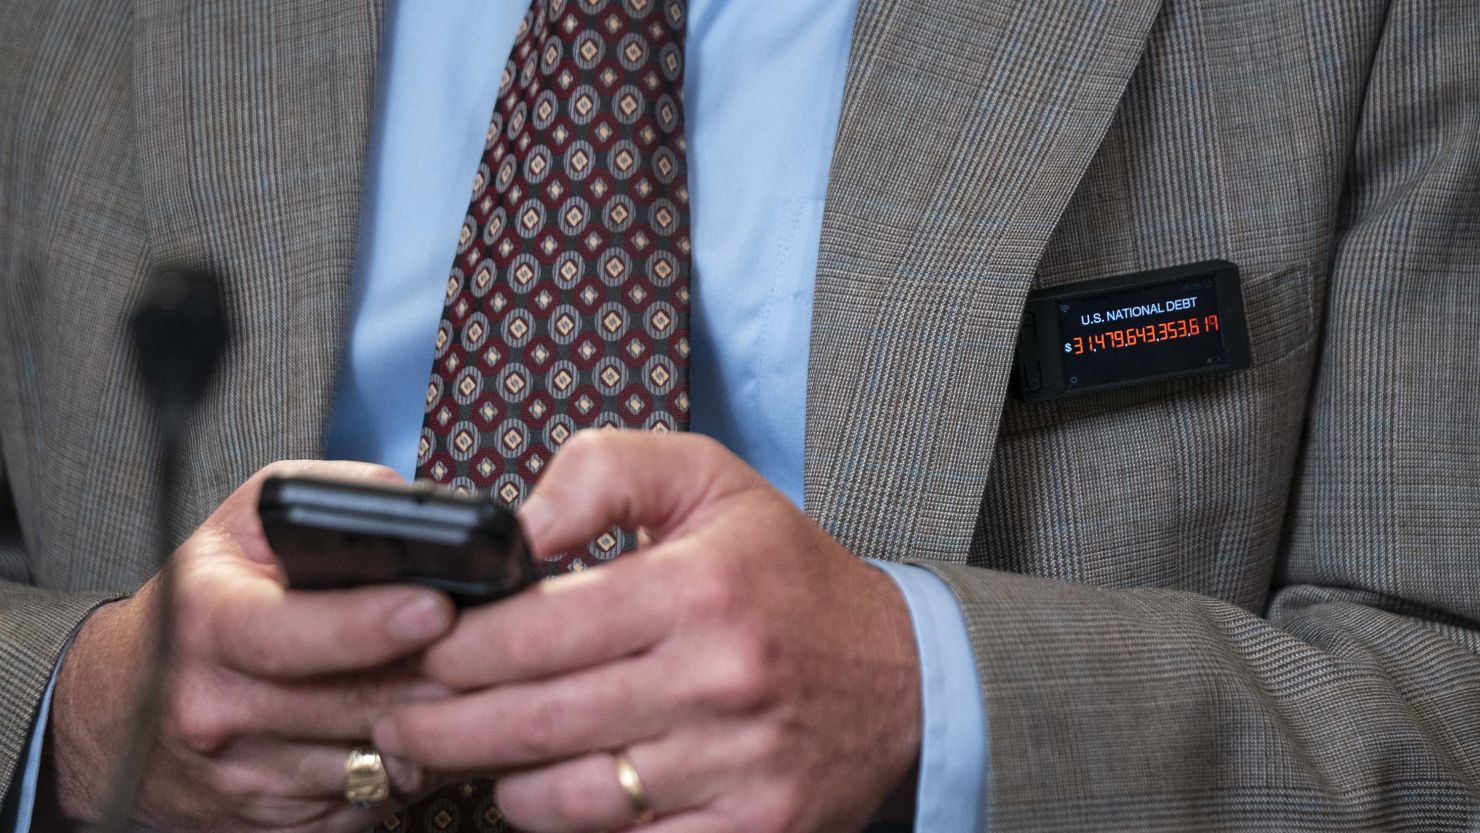 Rep. Thomas Massie, a Republican from Kentucky, wears a digital pin showing the US national debt during a meeting in Washington, DC, on Tuesday, May 30, 2023. 